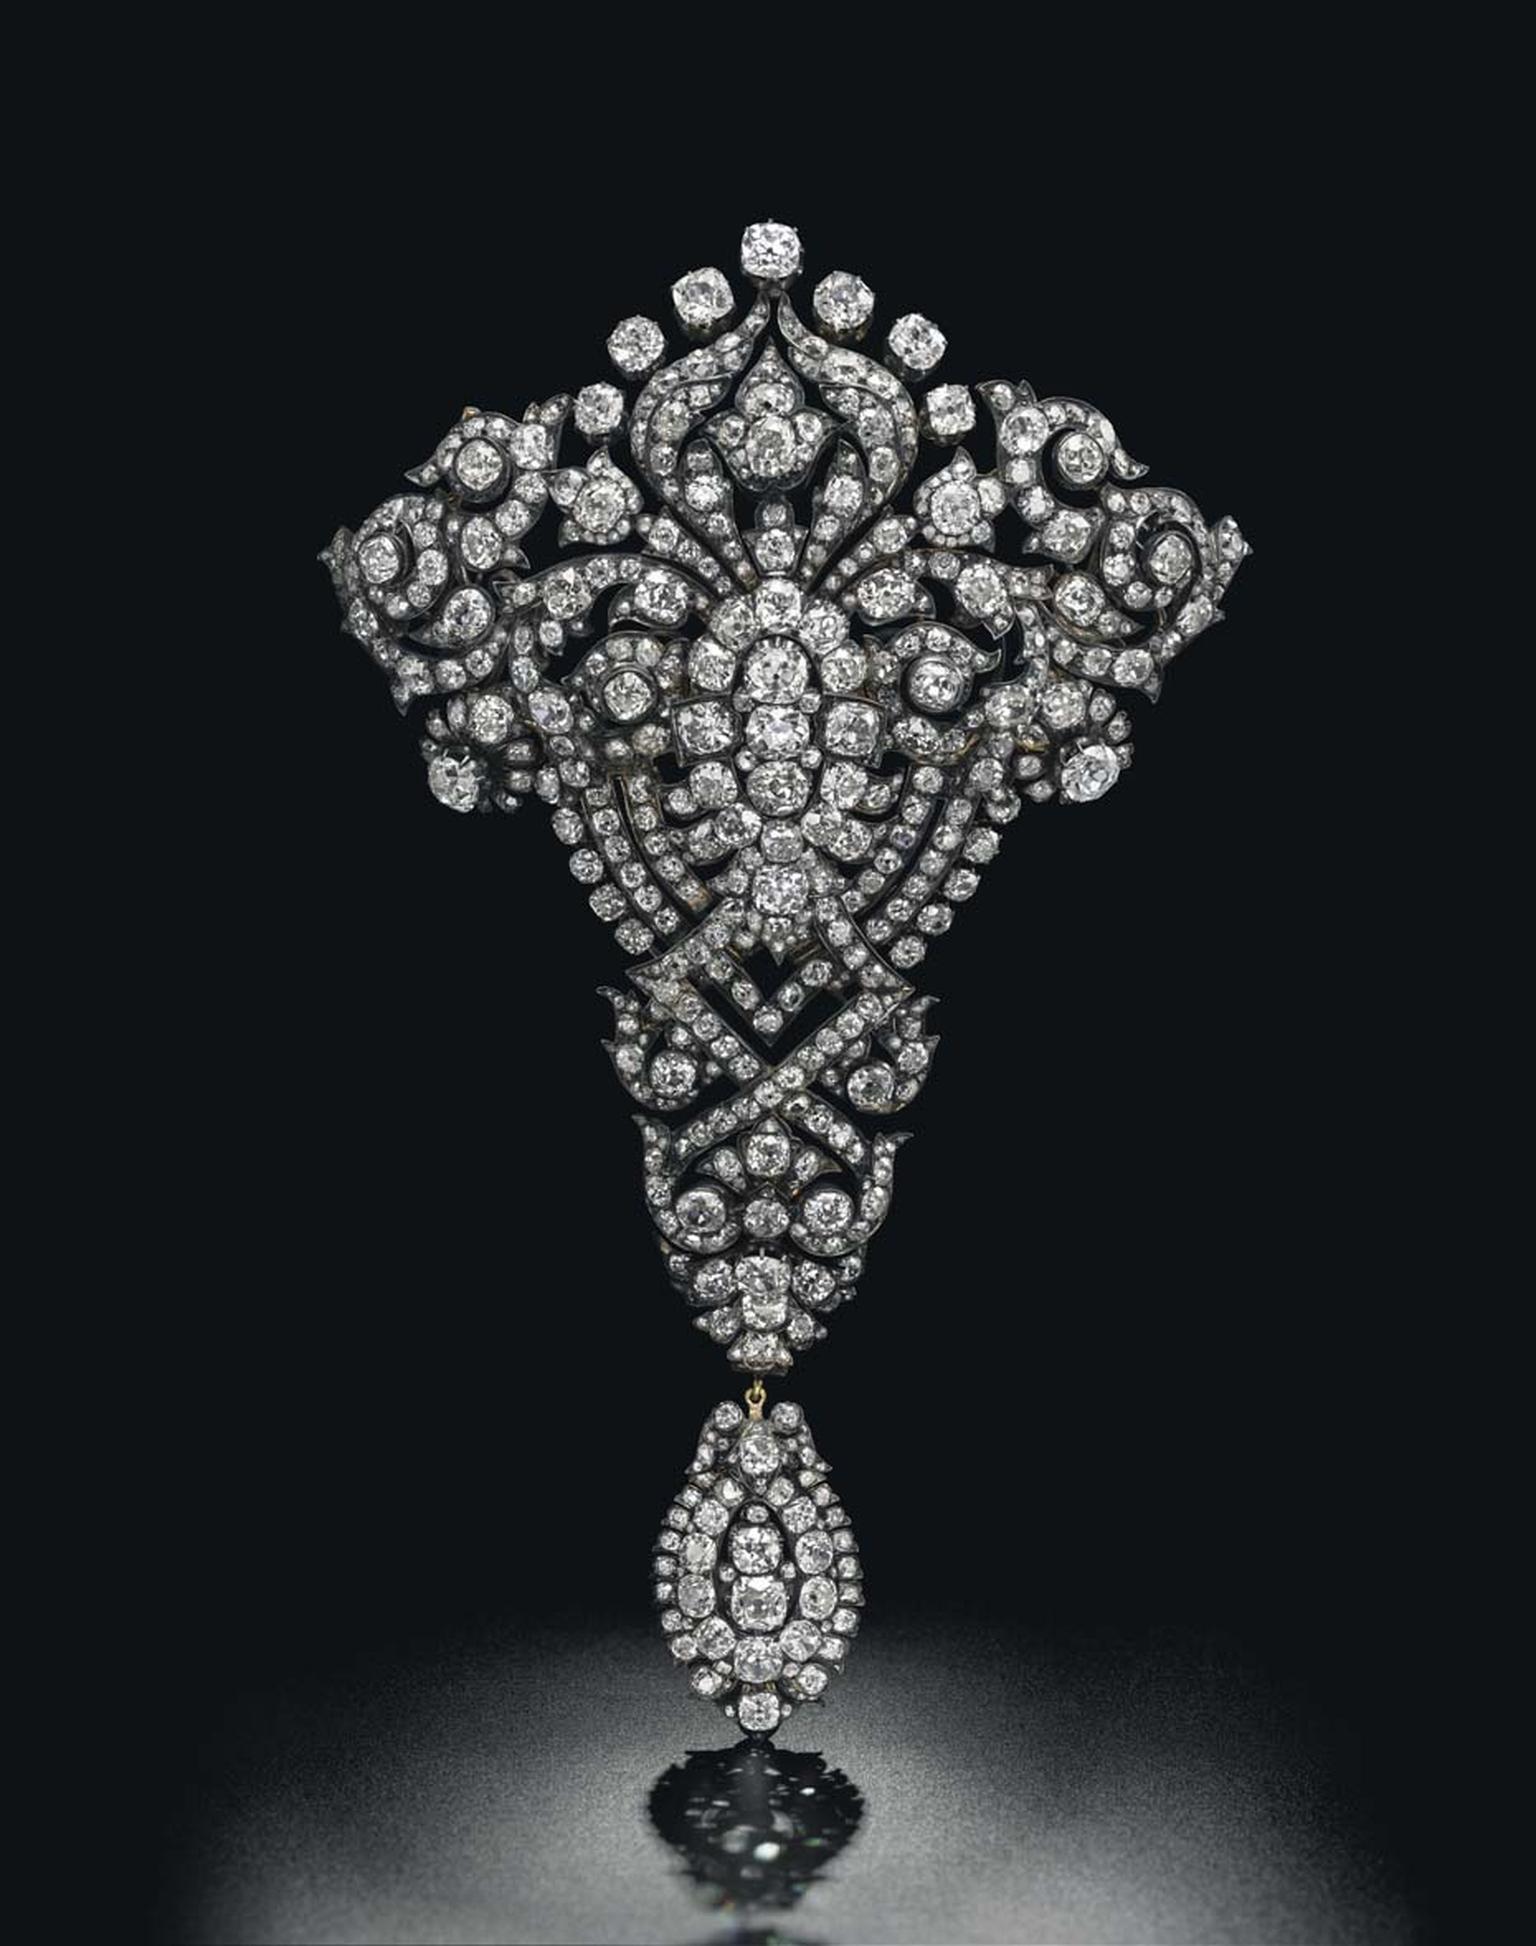 The spectacular Maria Christina Royal Devant-de-Corsage diamond brooch is expected to achieve $1.5-2 million at Christie's Magnificent Jewels sale in Geneva on 13 May 2015.